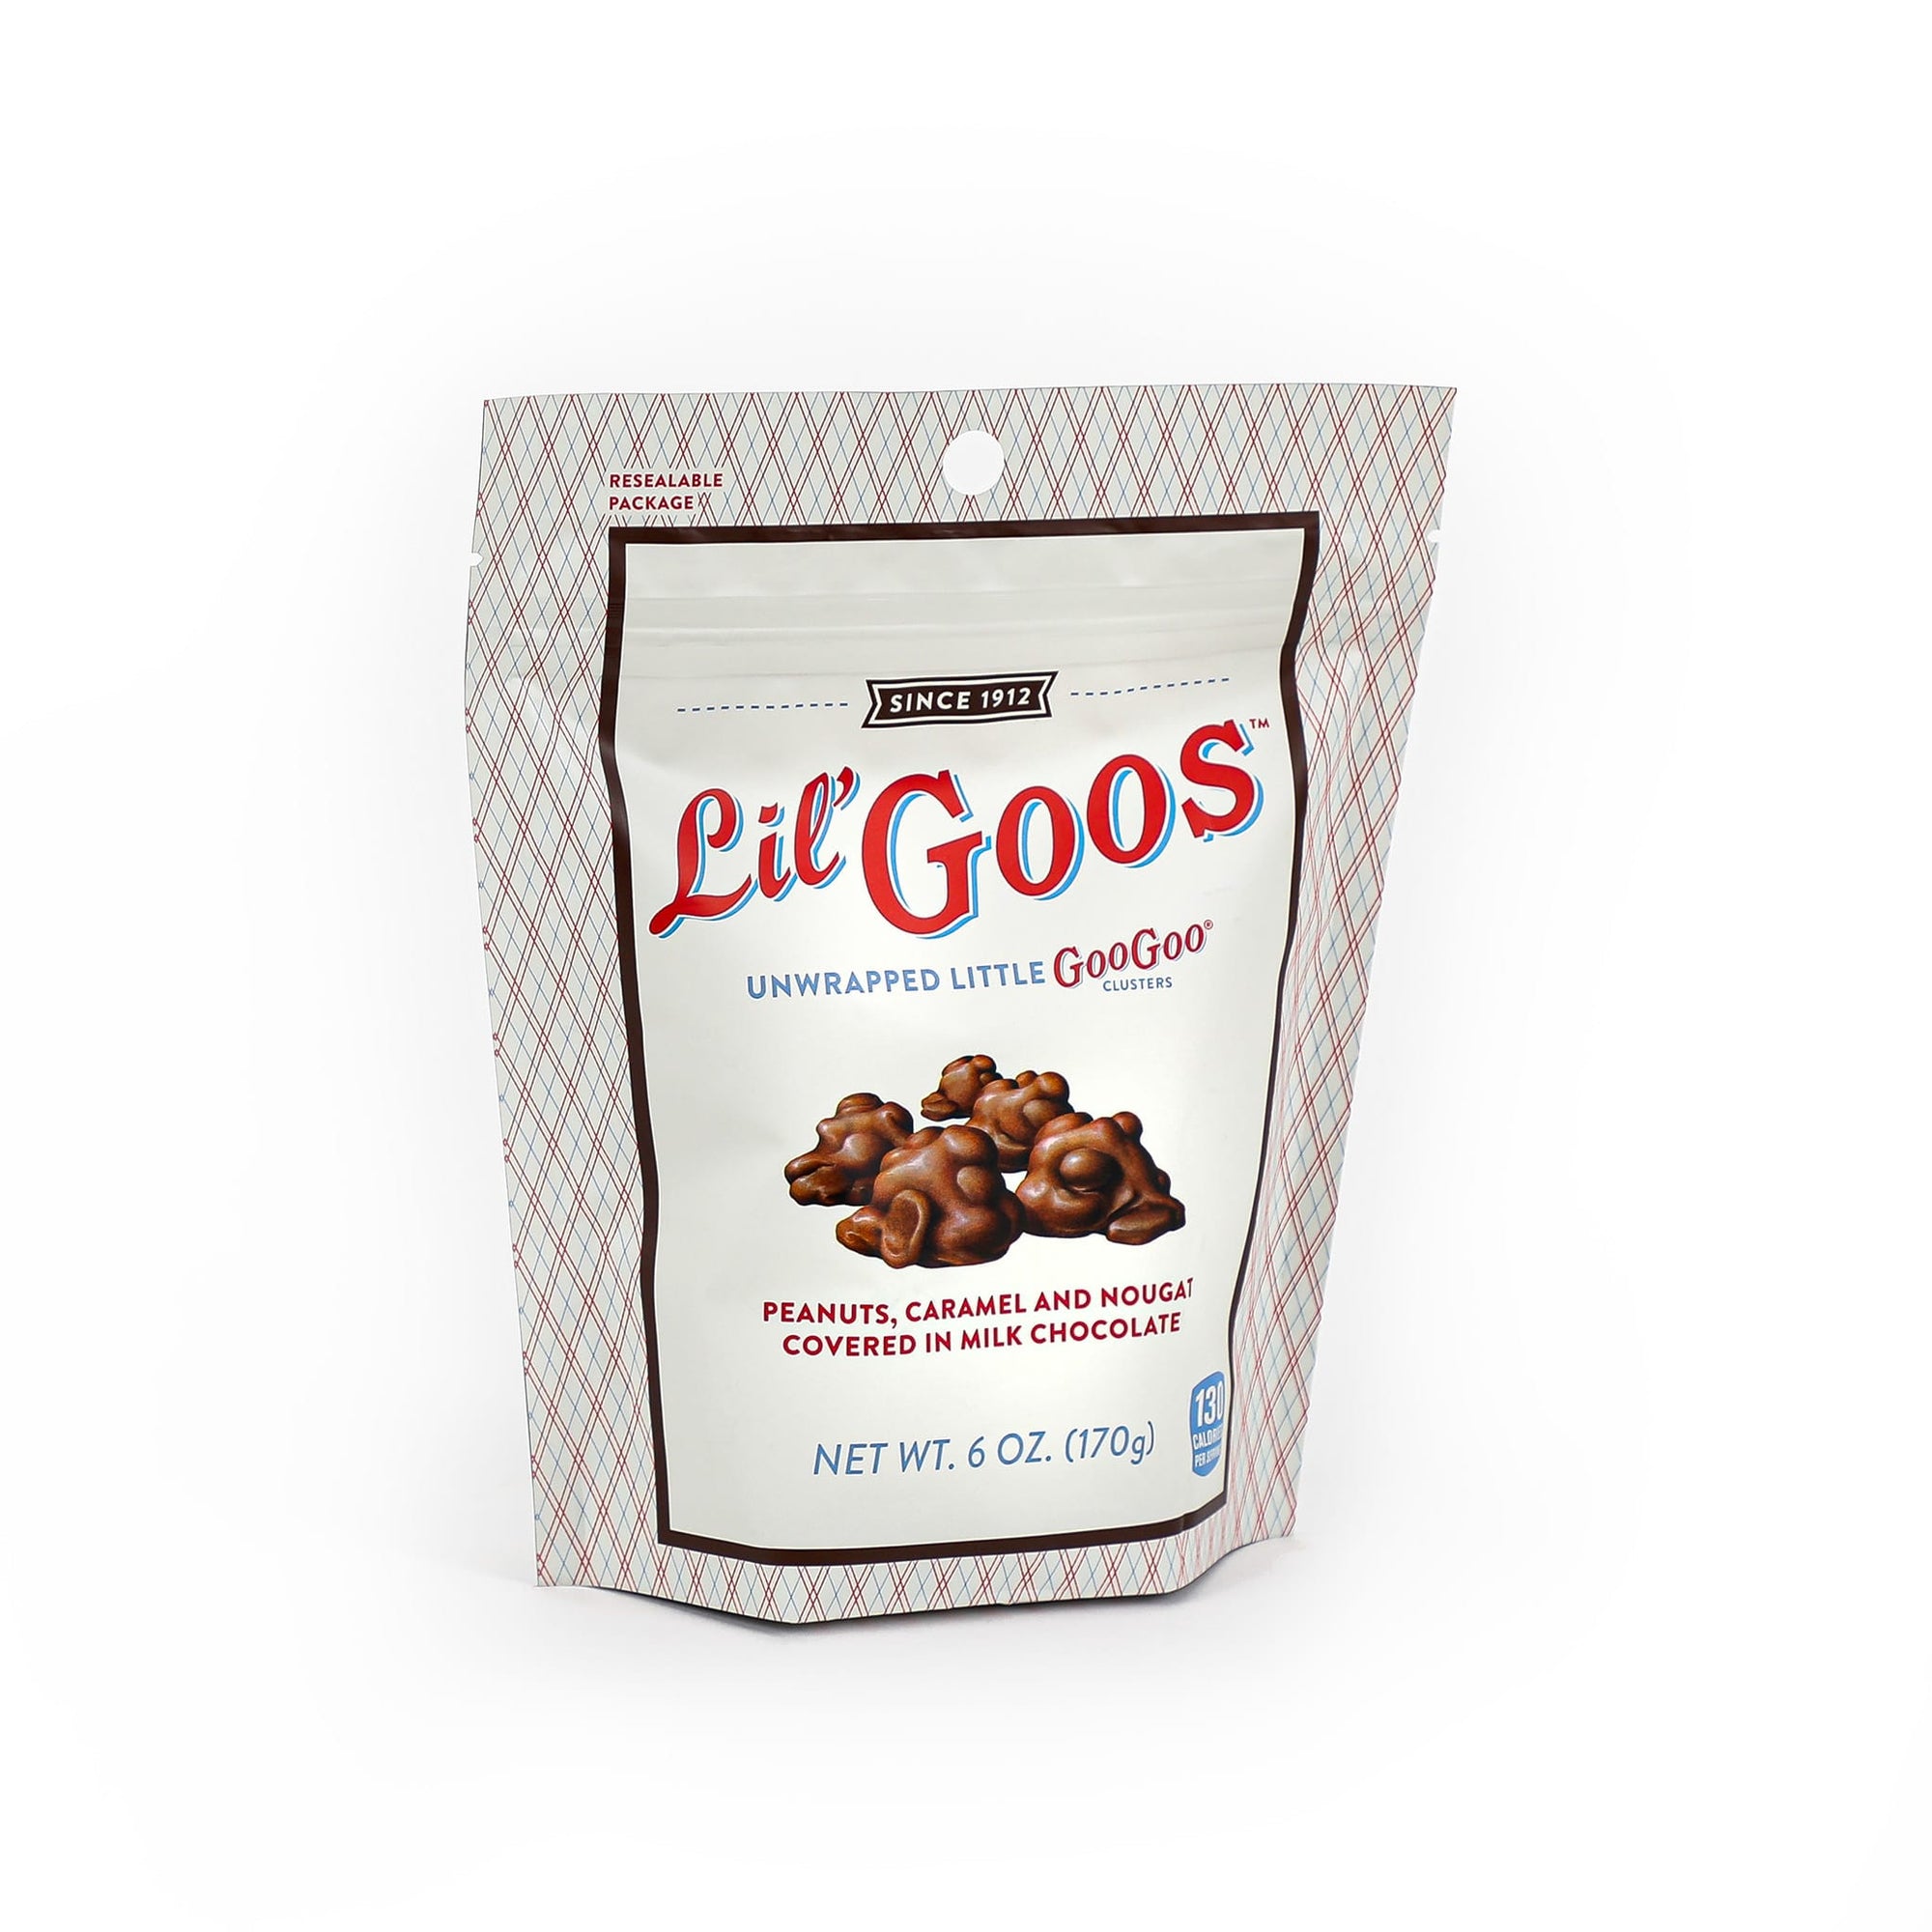 Buy Goo Goo Cluster Supreme Chocolate, 1.5 Ounce Online at